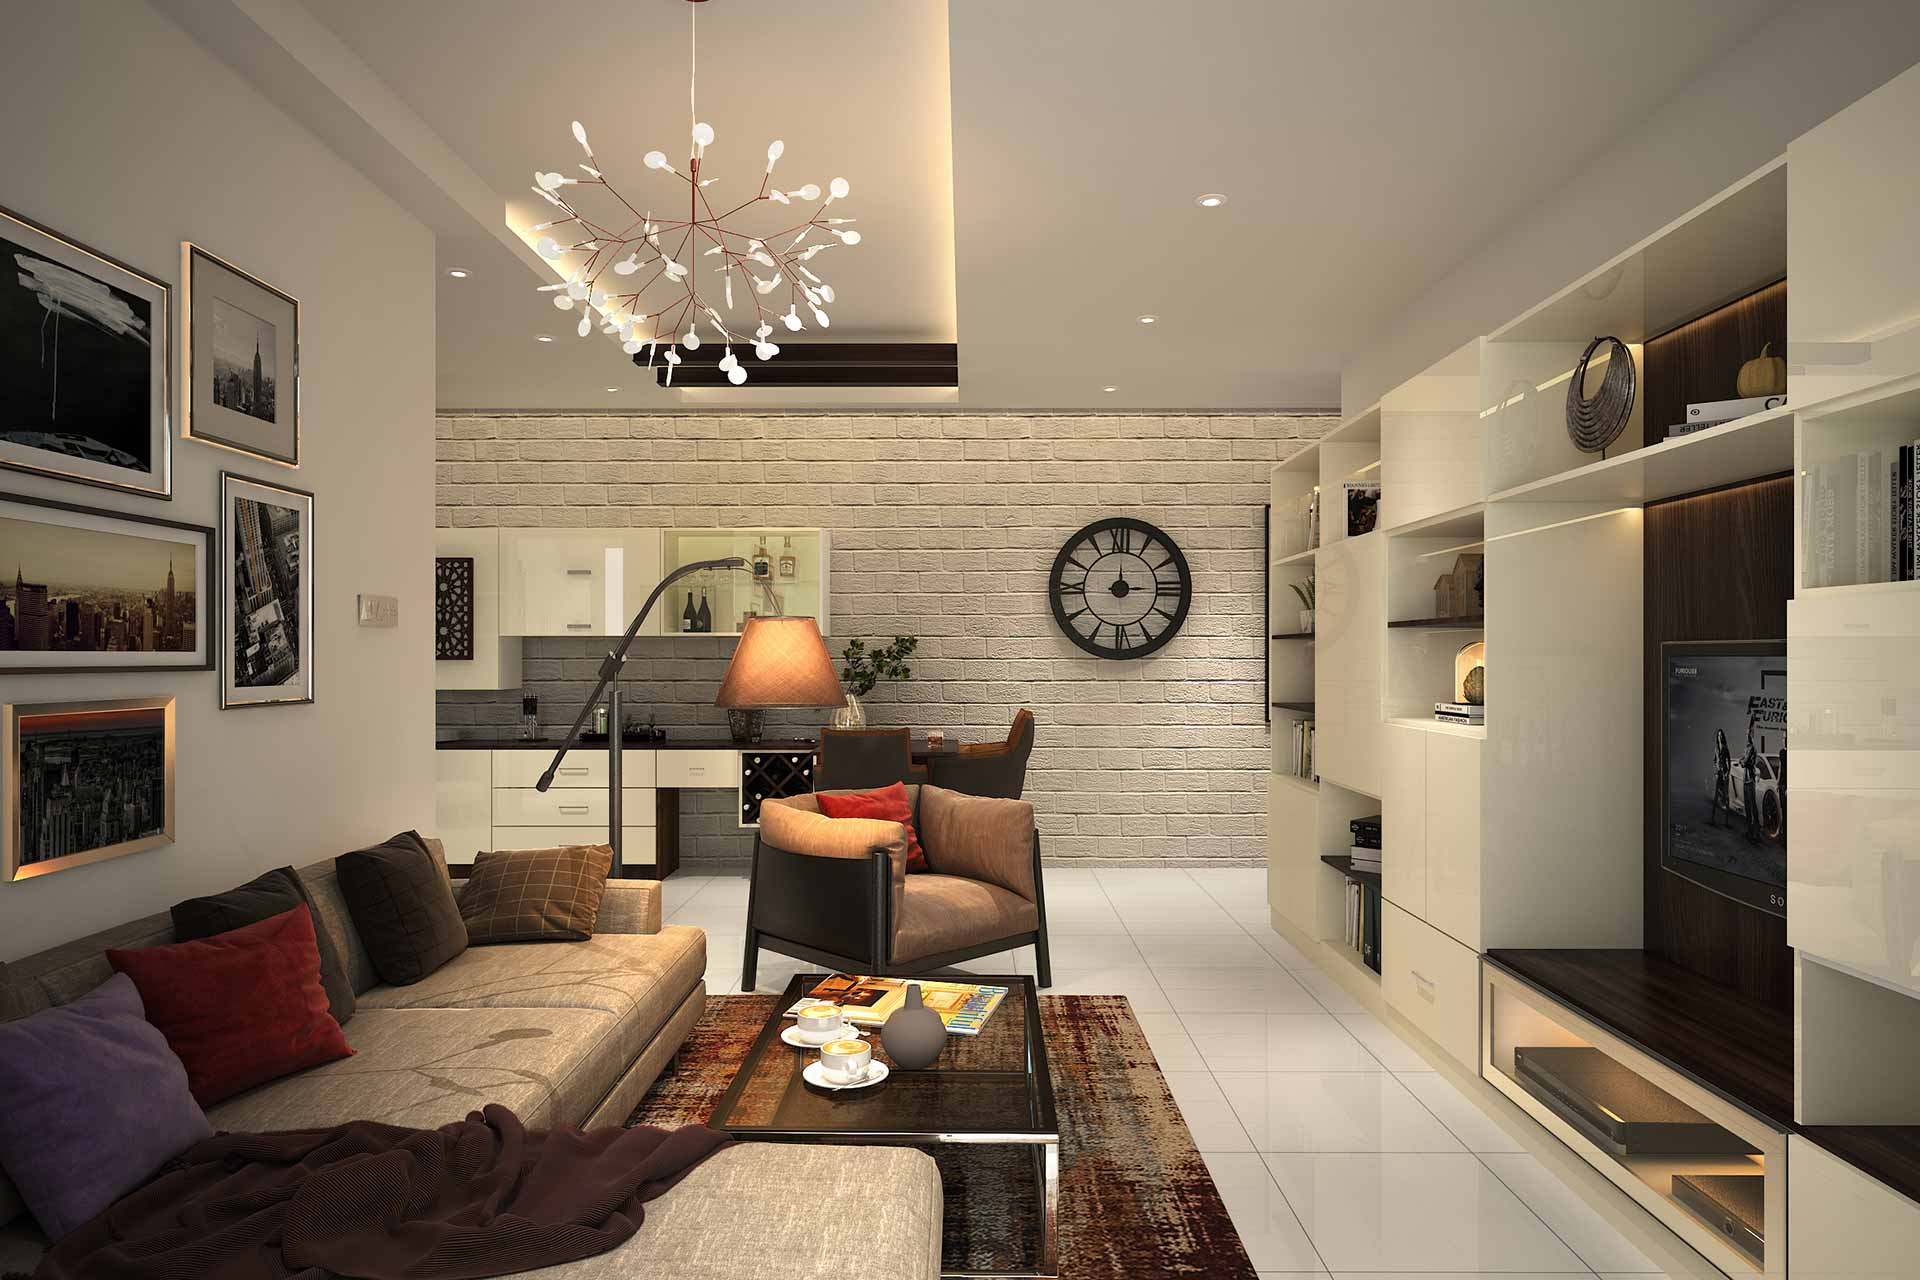 Luxury Home Lighting Design: Creating The Perfect Ambiance For Every Room